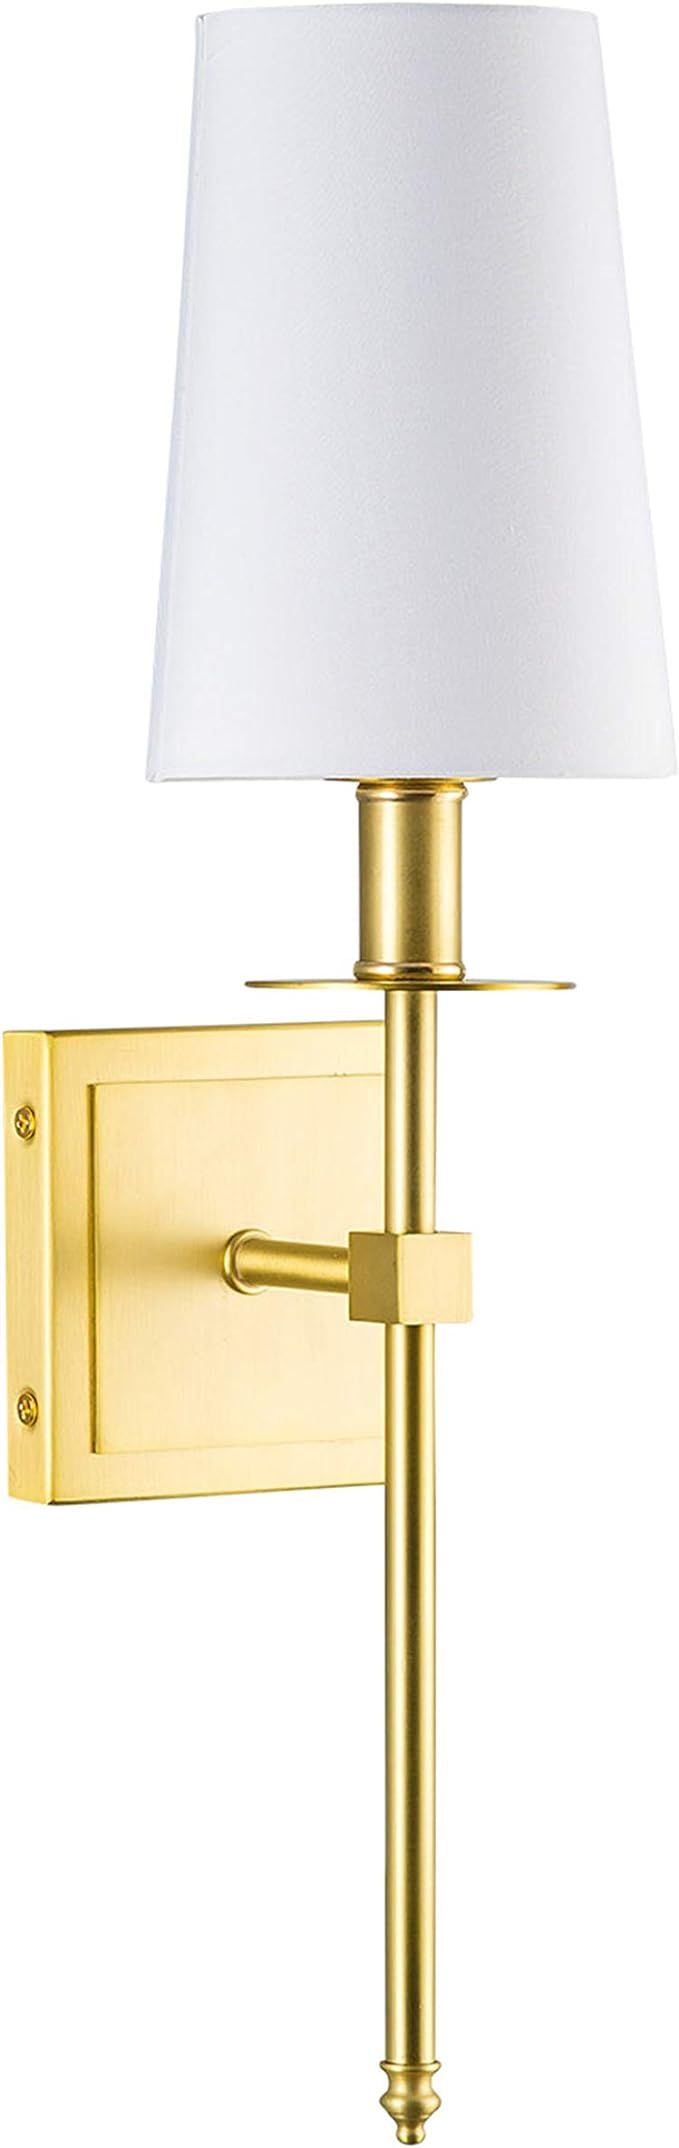 Linea di Liara Torcia Gold Wall Sconces with Shade Brushed Brass Wallchiere Wall Lamp for Bedroom... | Amazon (US)